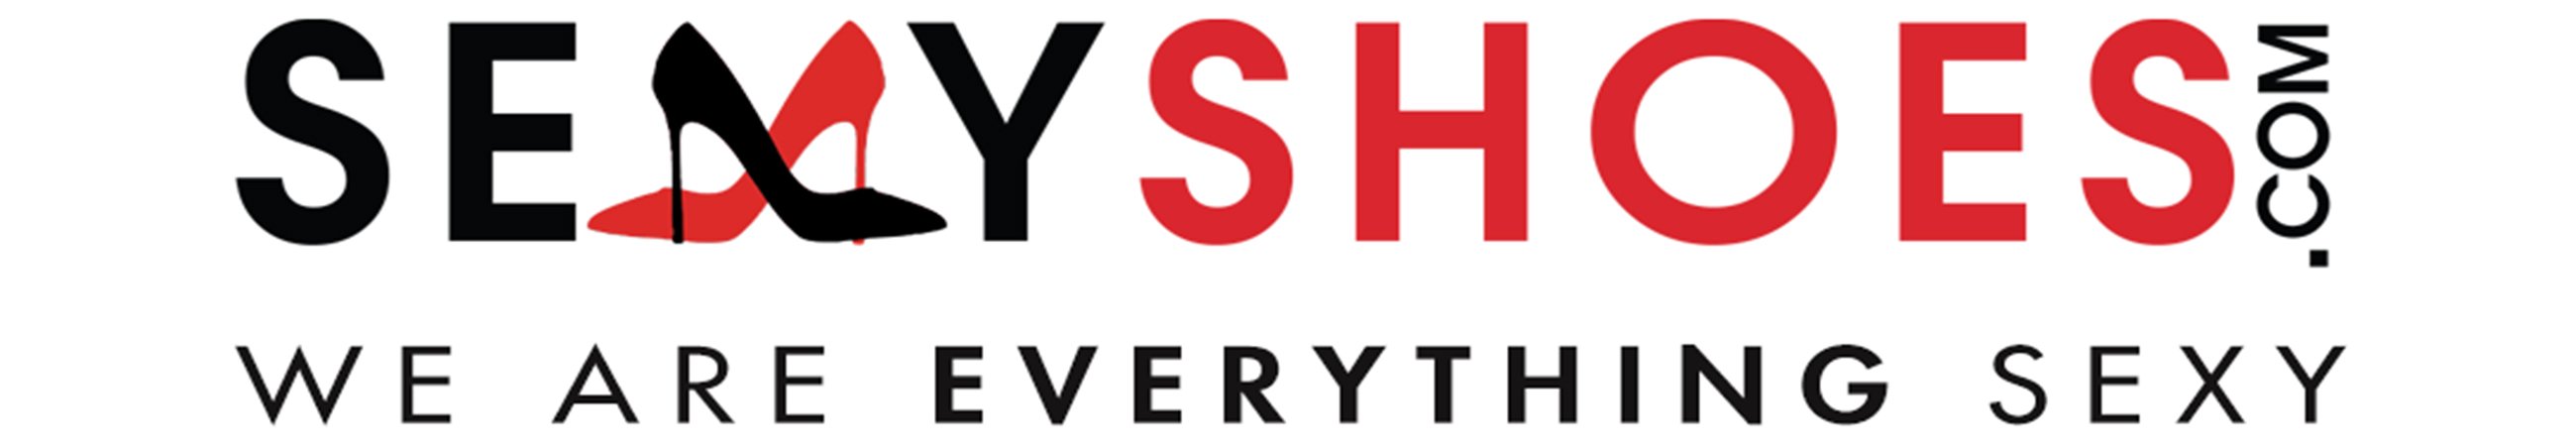 SexyShoes Help Center logo